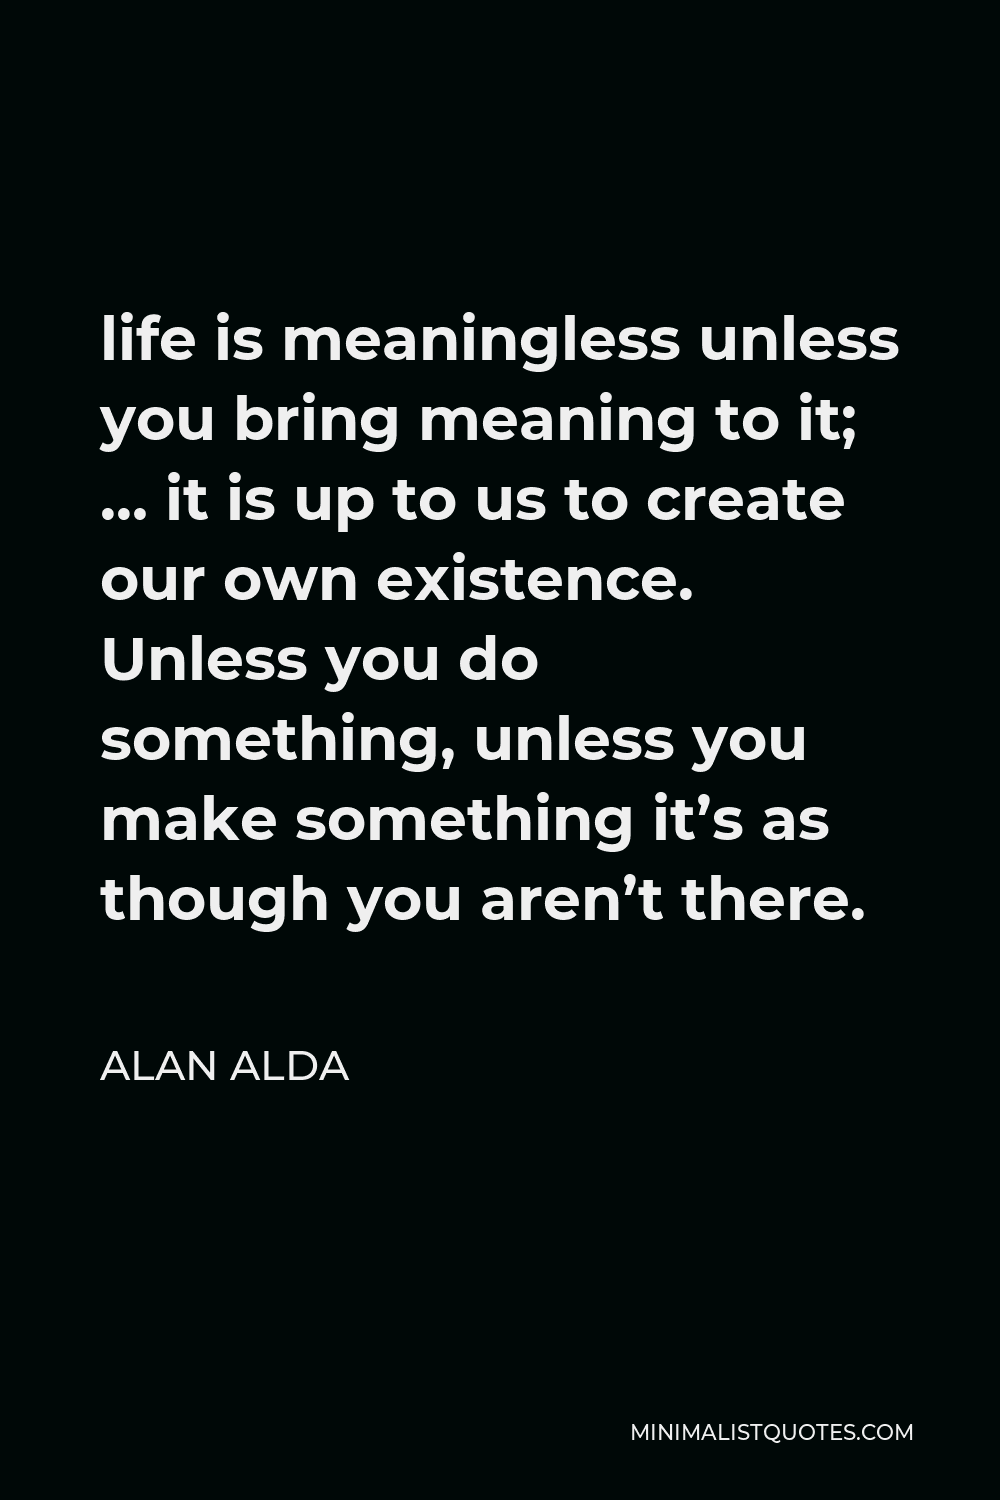 Alan Alda Quote - life is meaningless unless you bring meaning to it; … it is up to us to create our own existence. Unless you do something, unless you make something it’s as though you aren’t there.